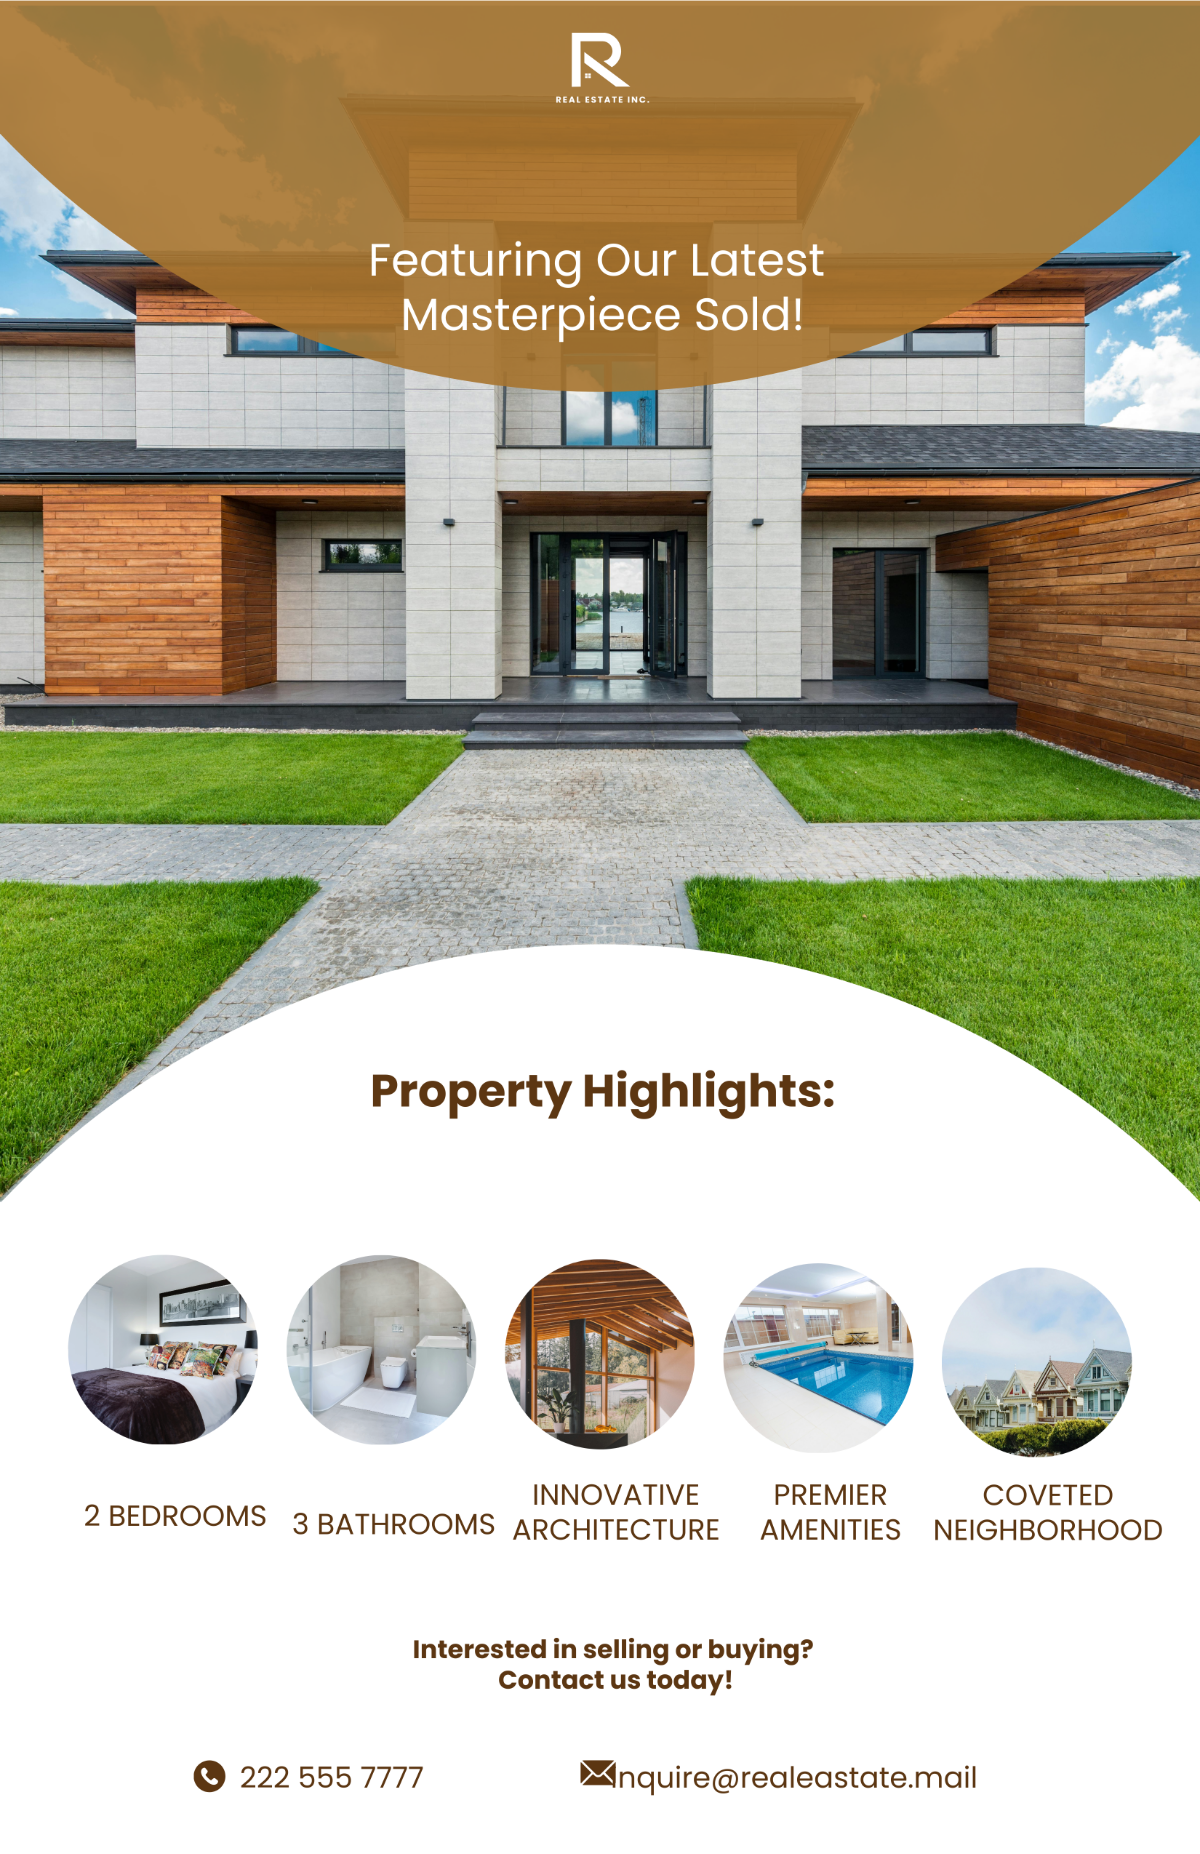 Recently Sold Property Showcase Poster